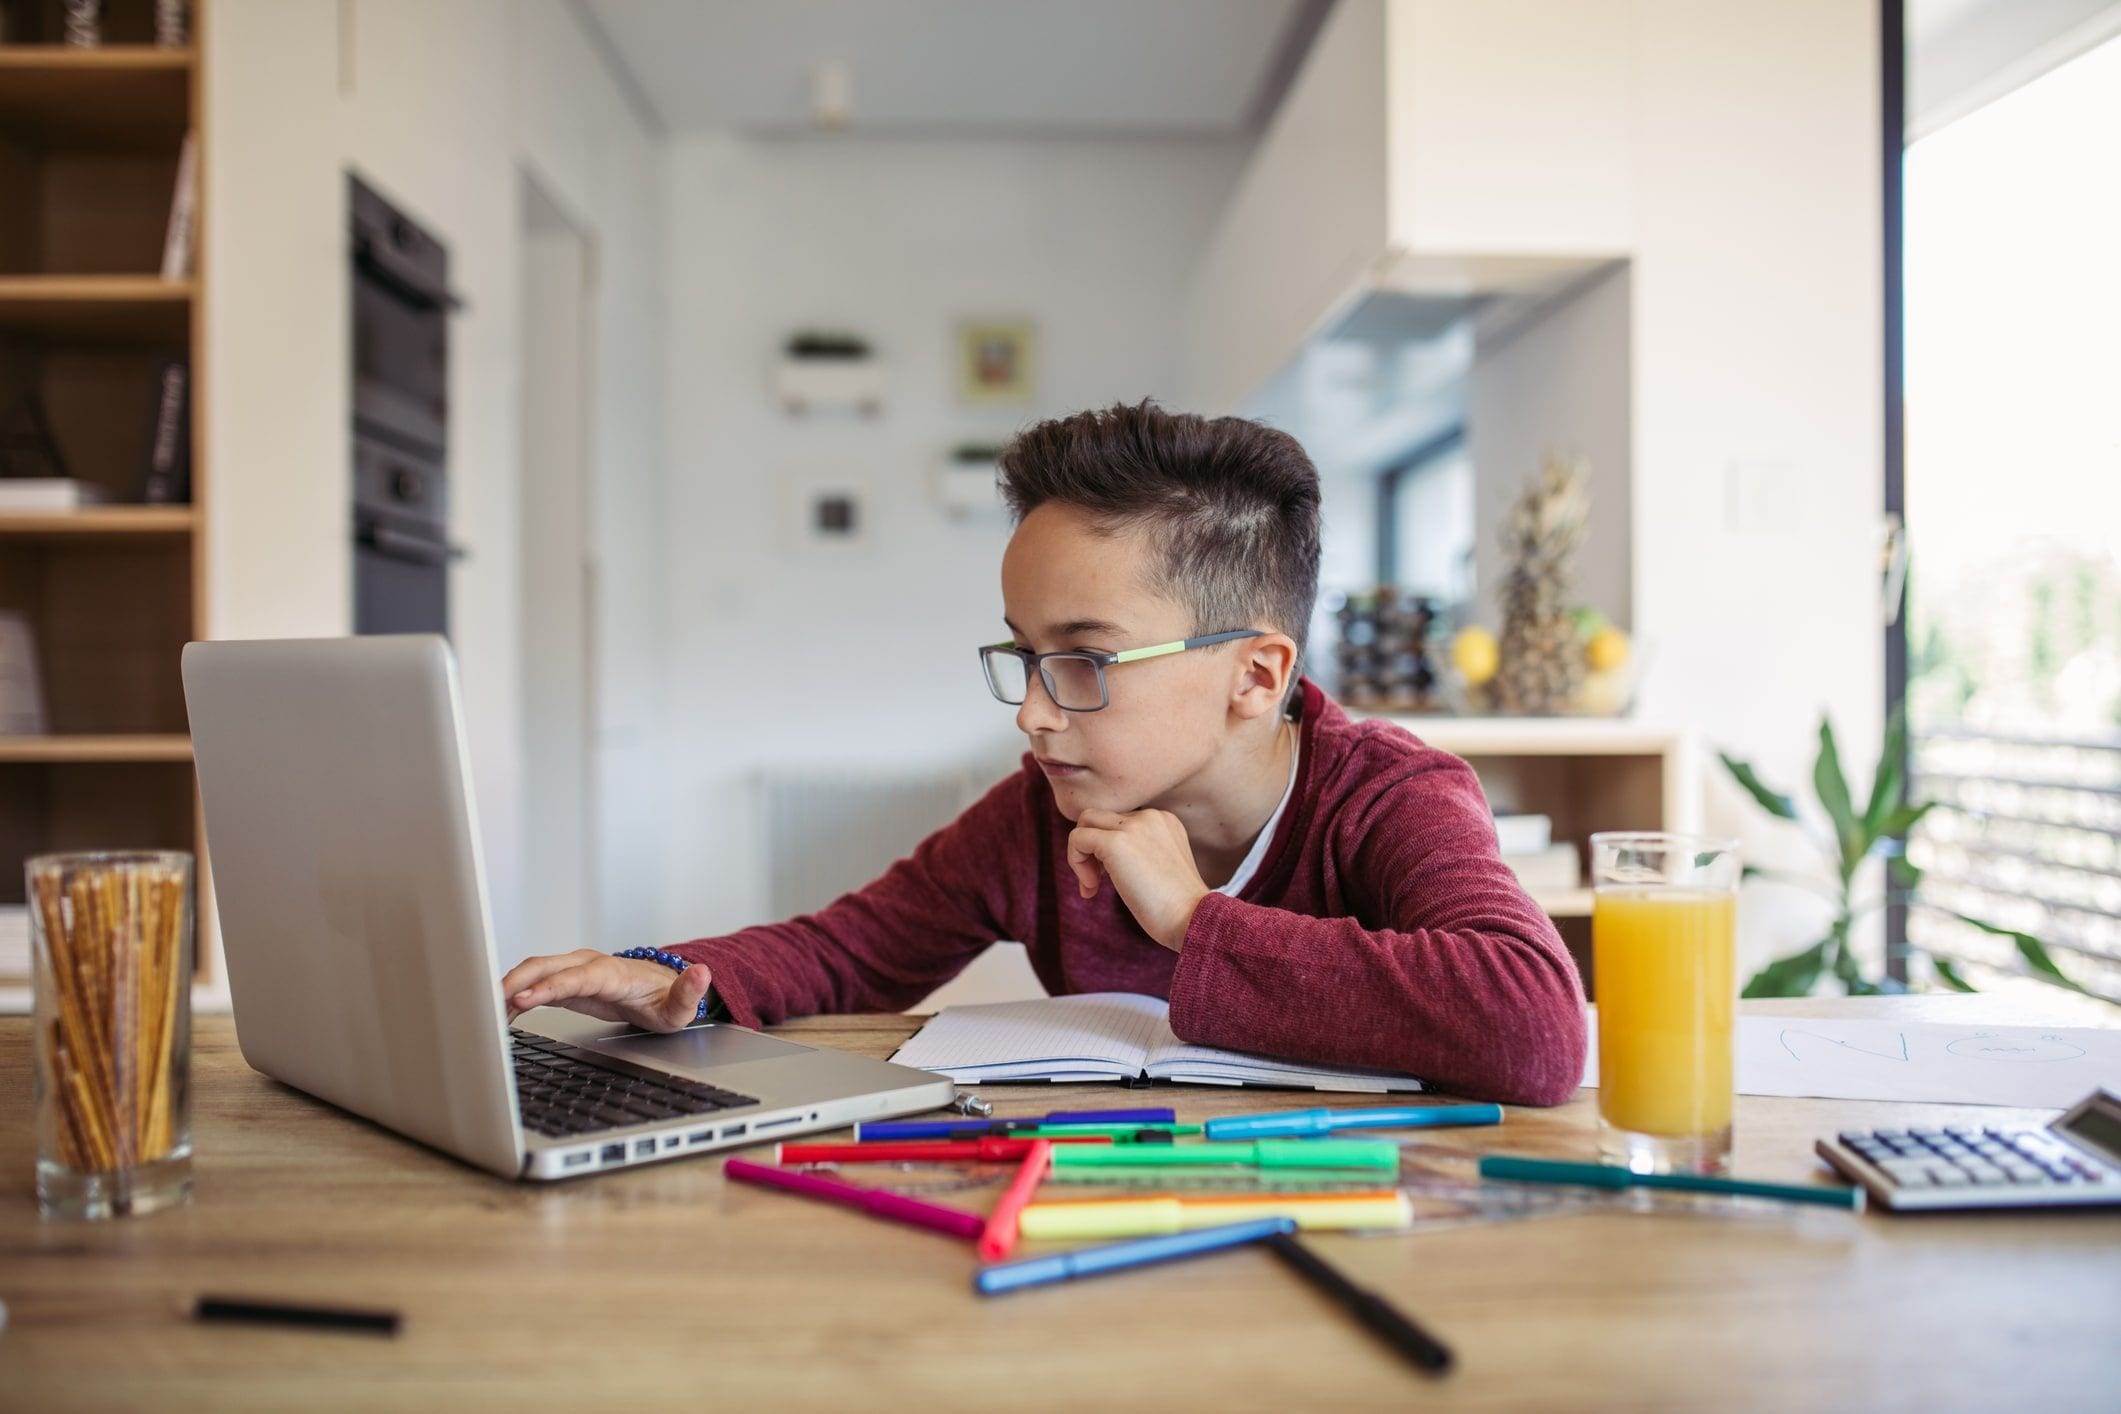 The 12 best online tutoring services for 2022